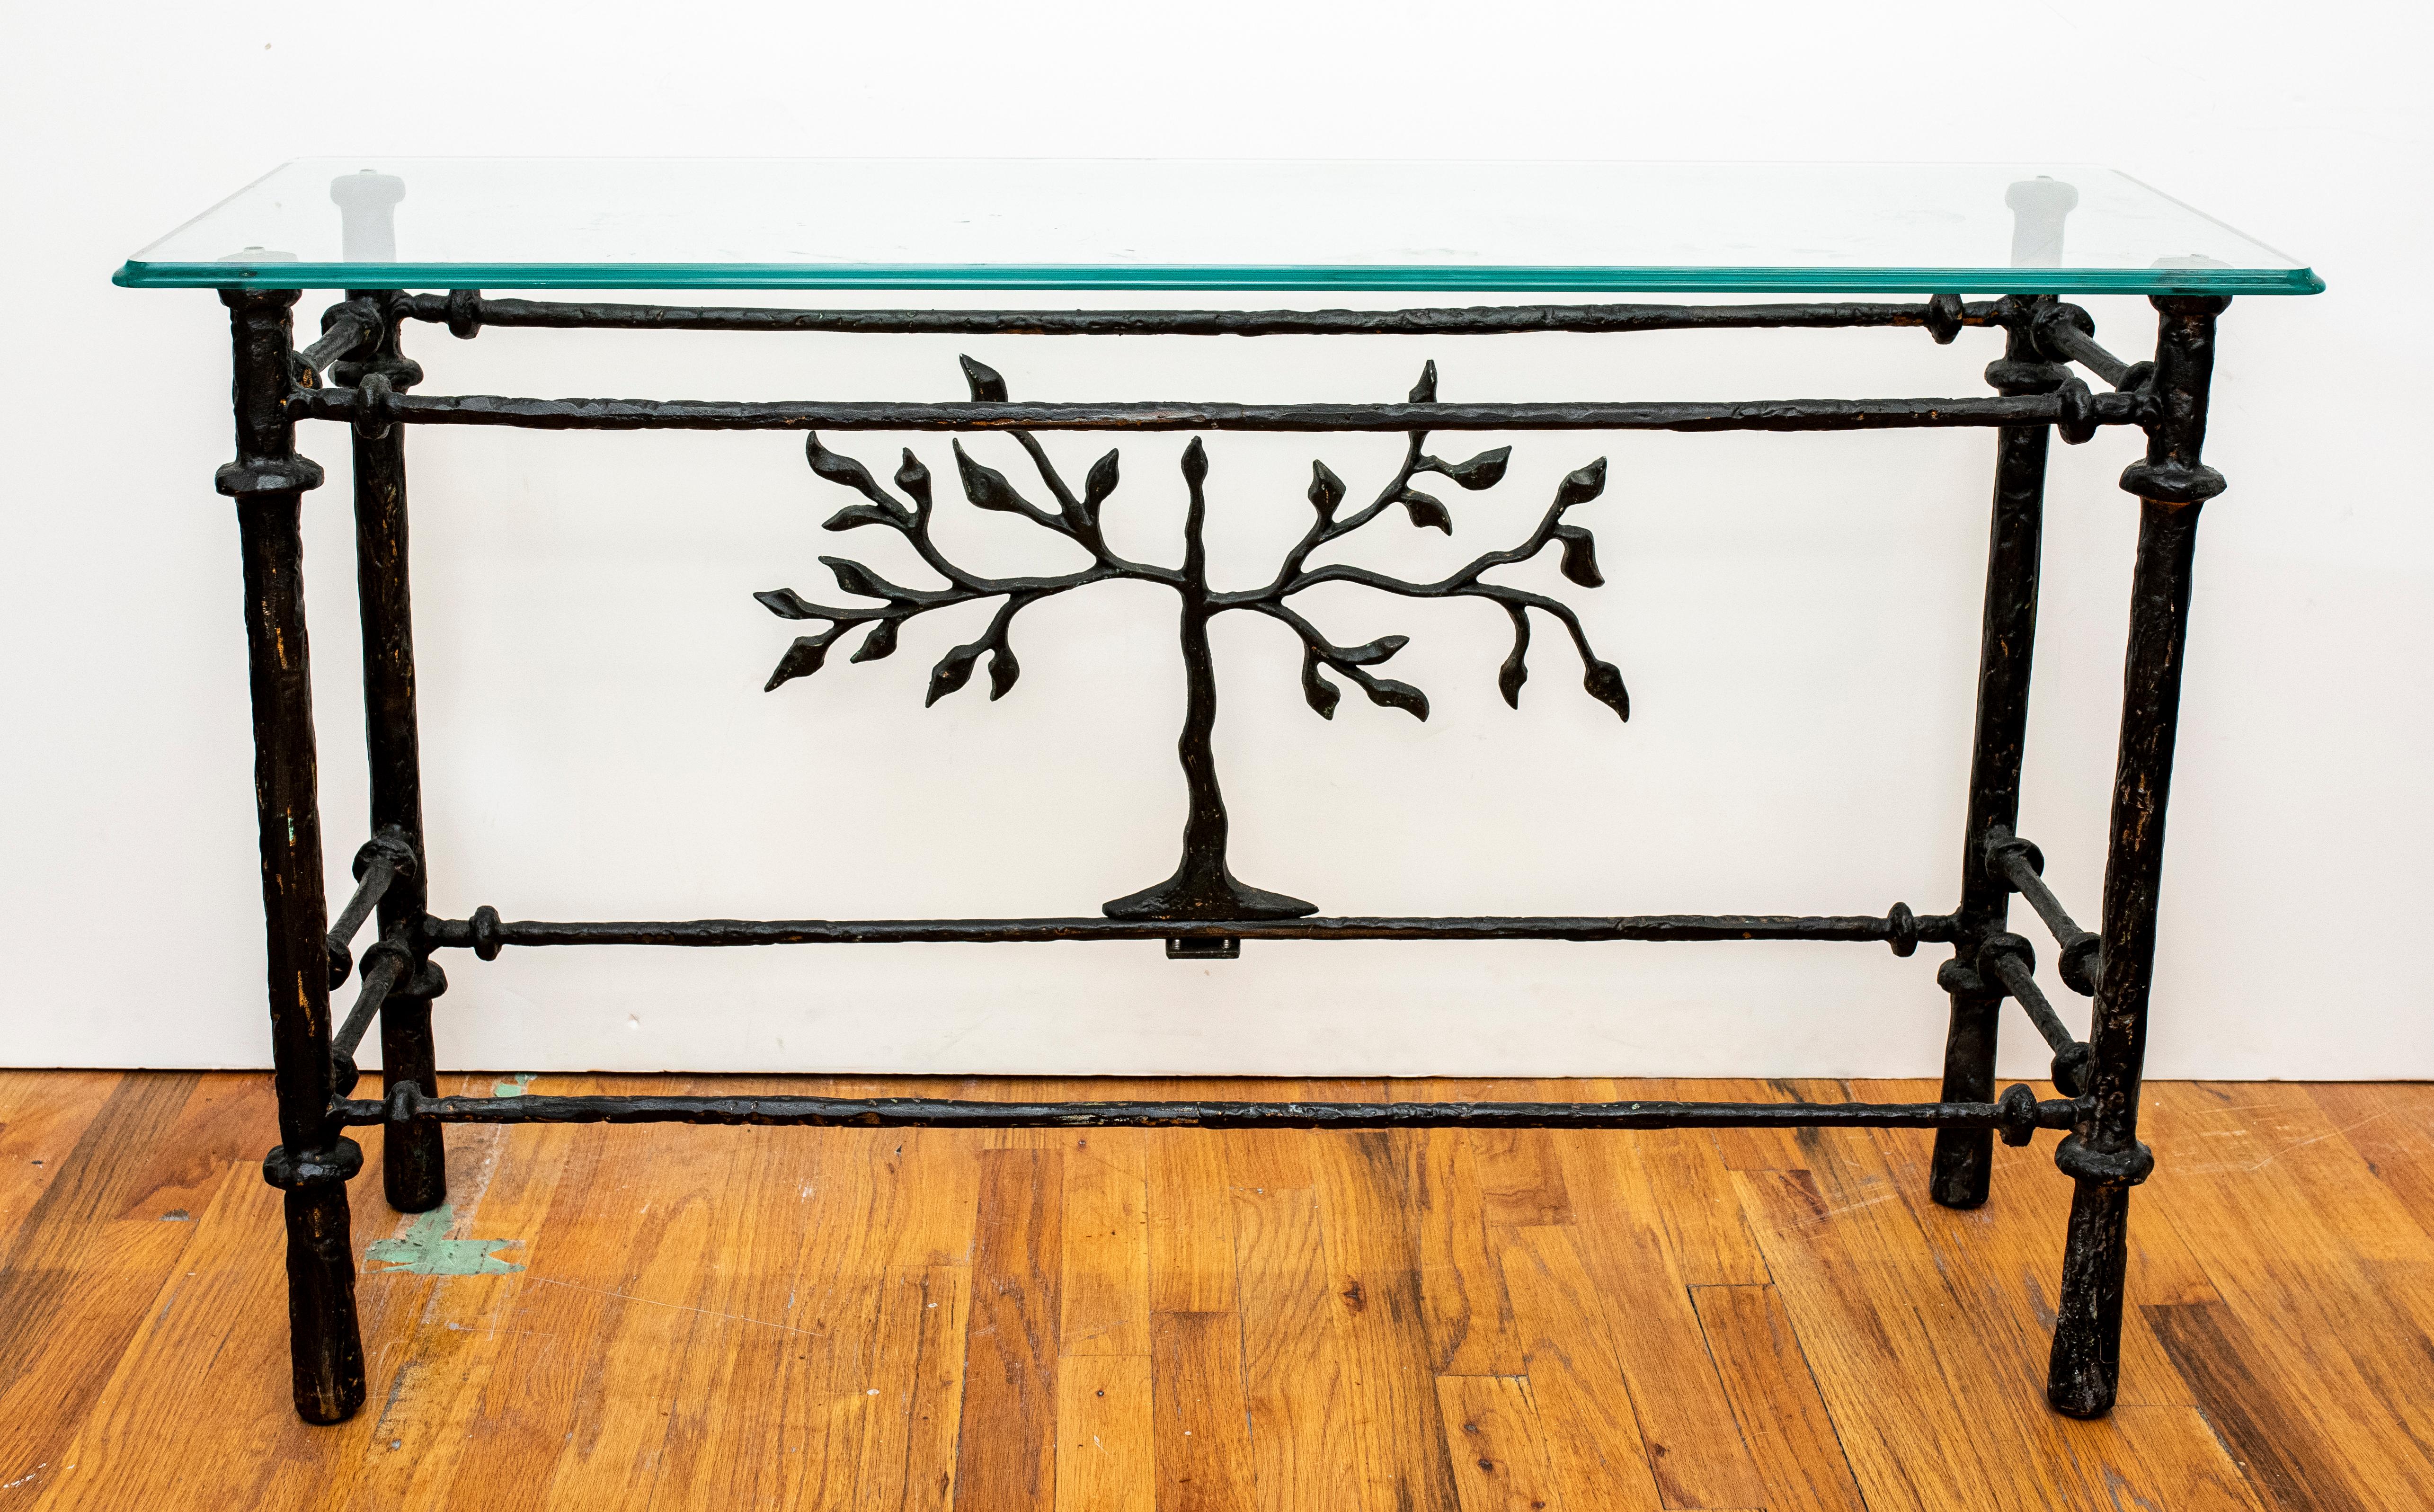 Diego Giacometti Style modern cast metal console table with tree motif at the back side and glass top. Measures: 27.5